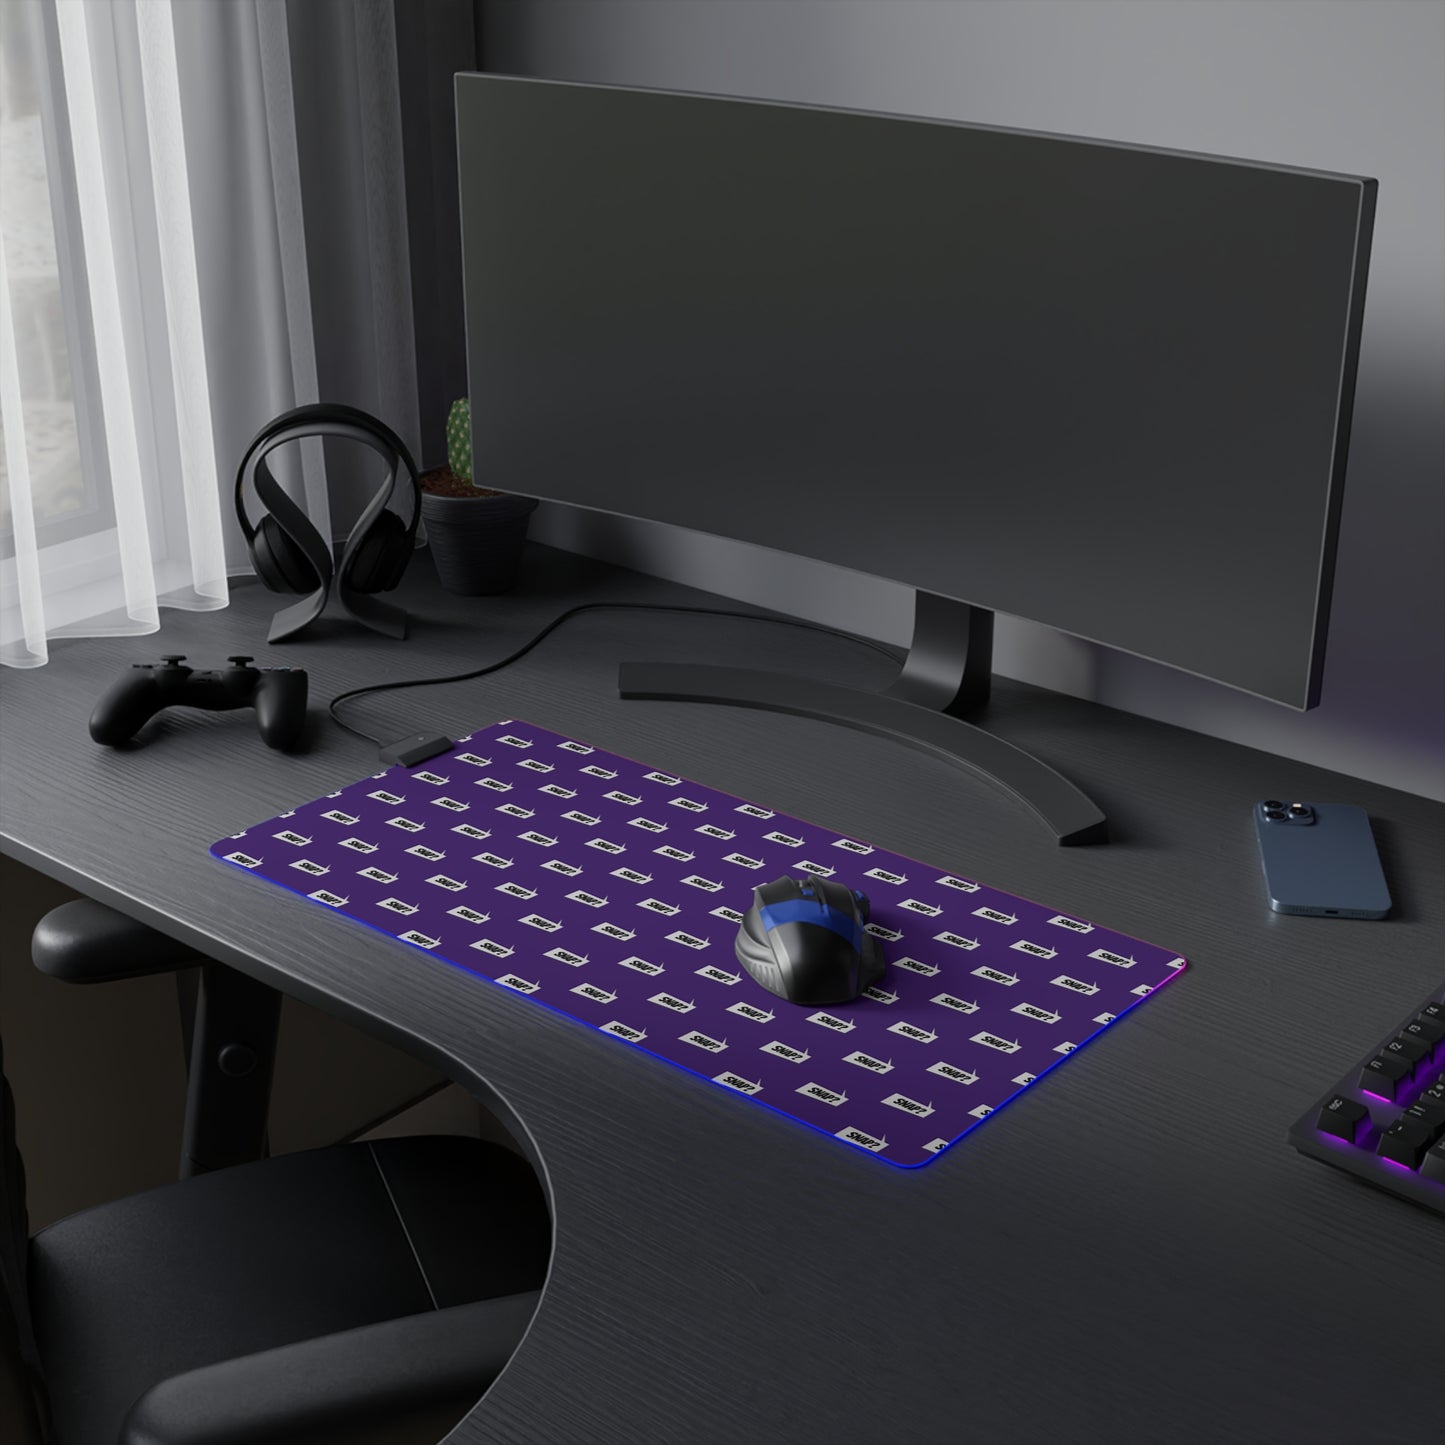 "Snap?" Marvel Snap LED Gaming Mouse Pad